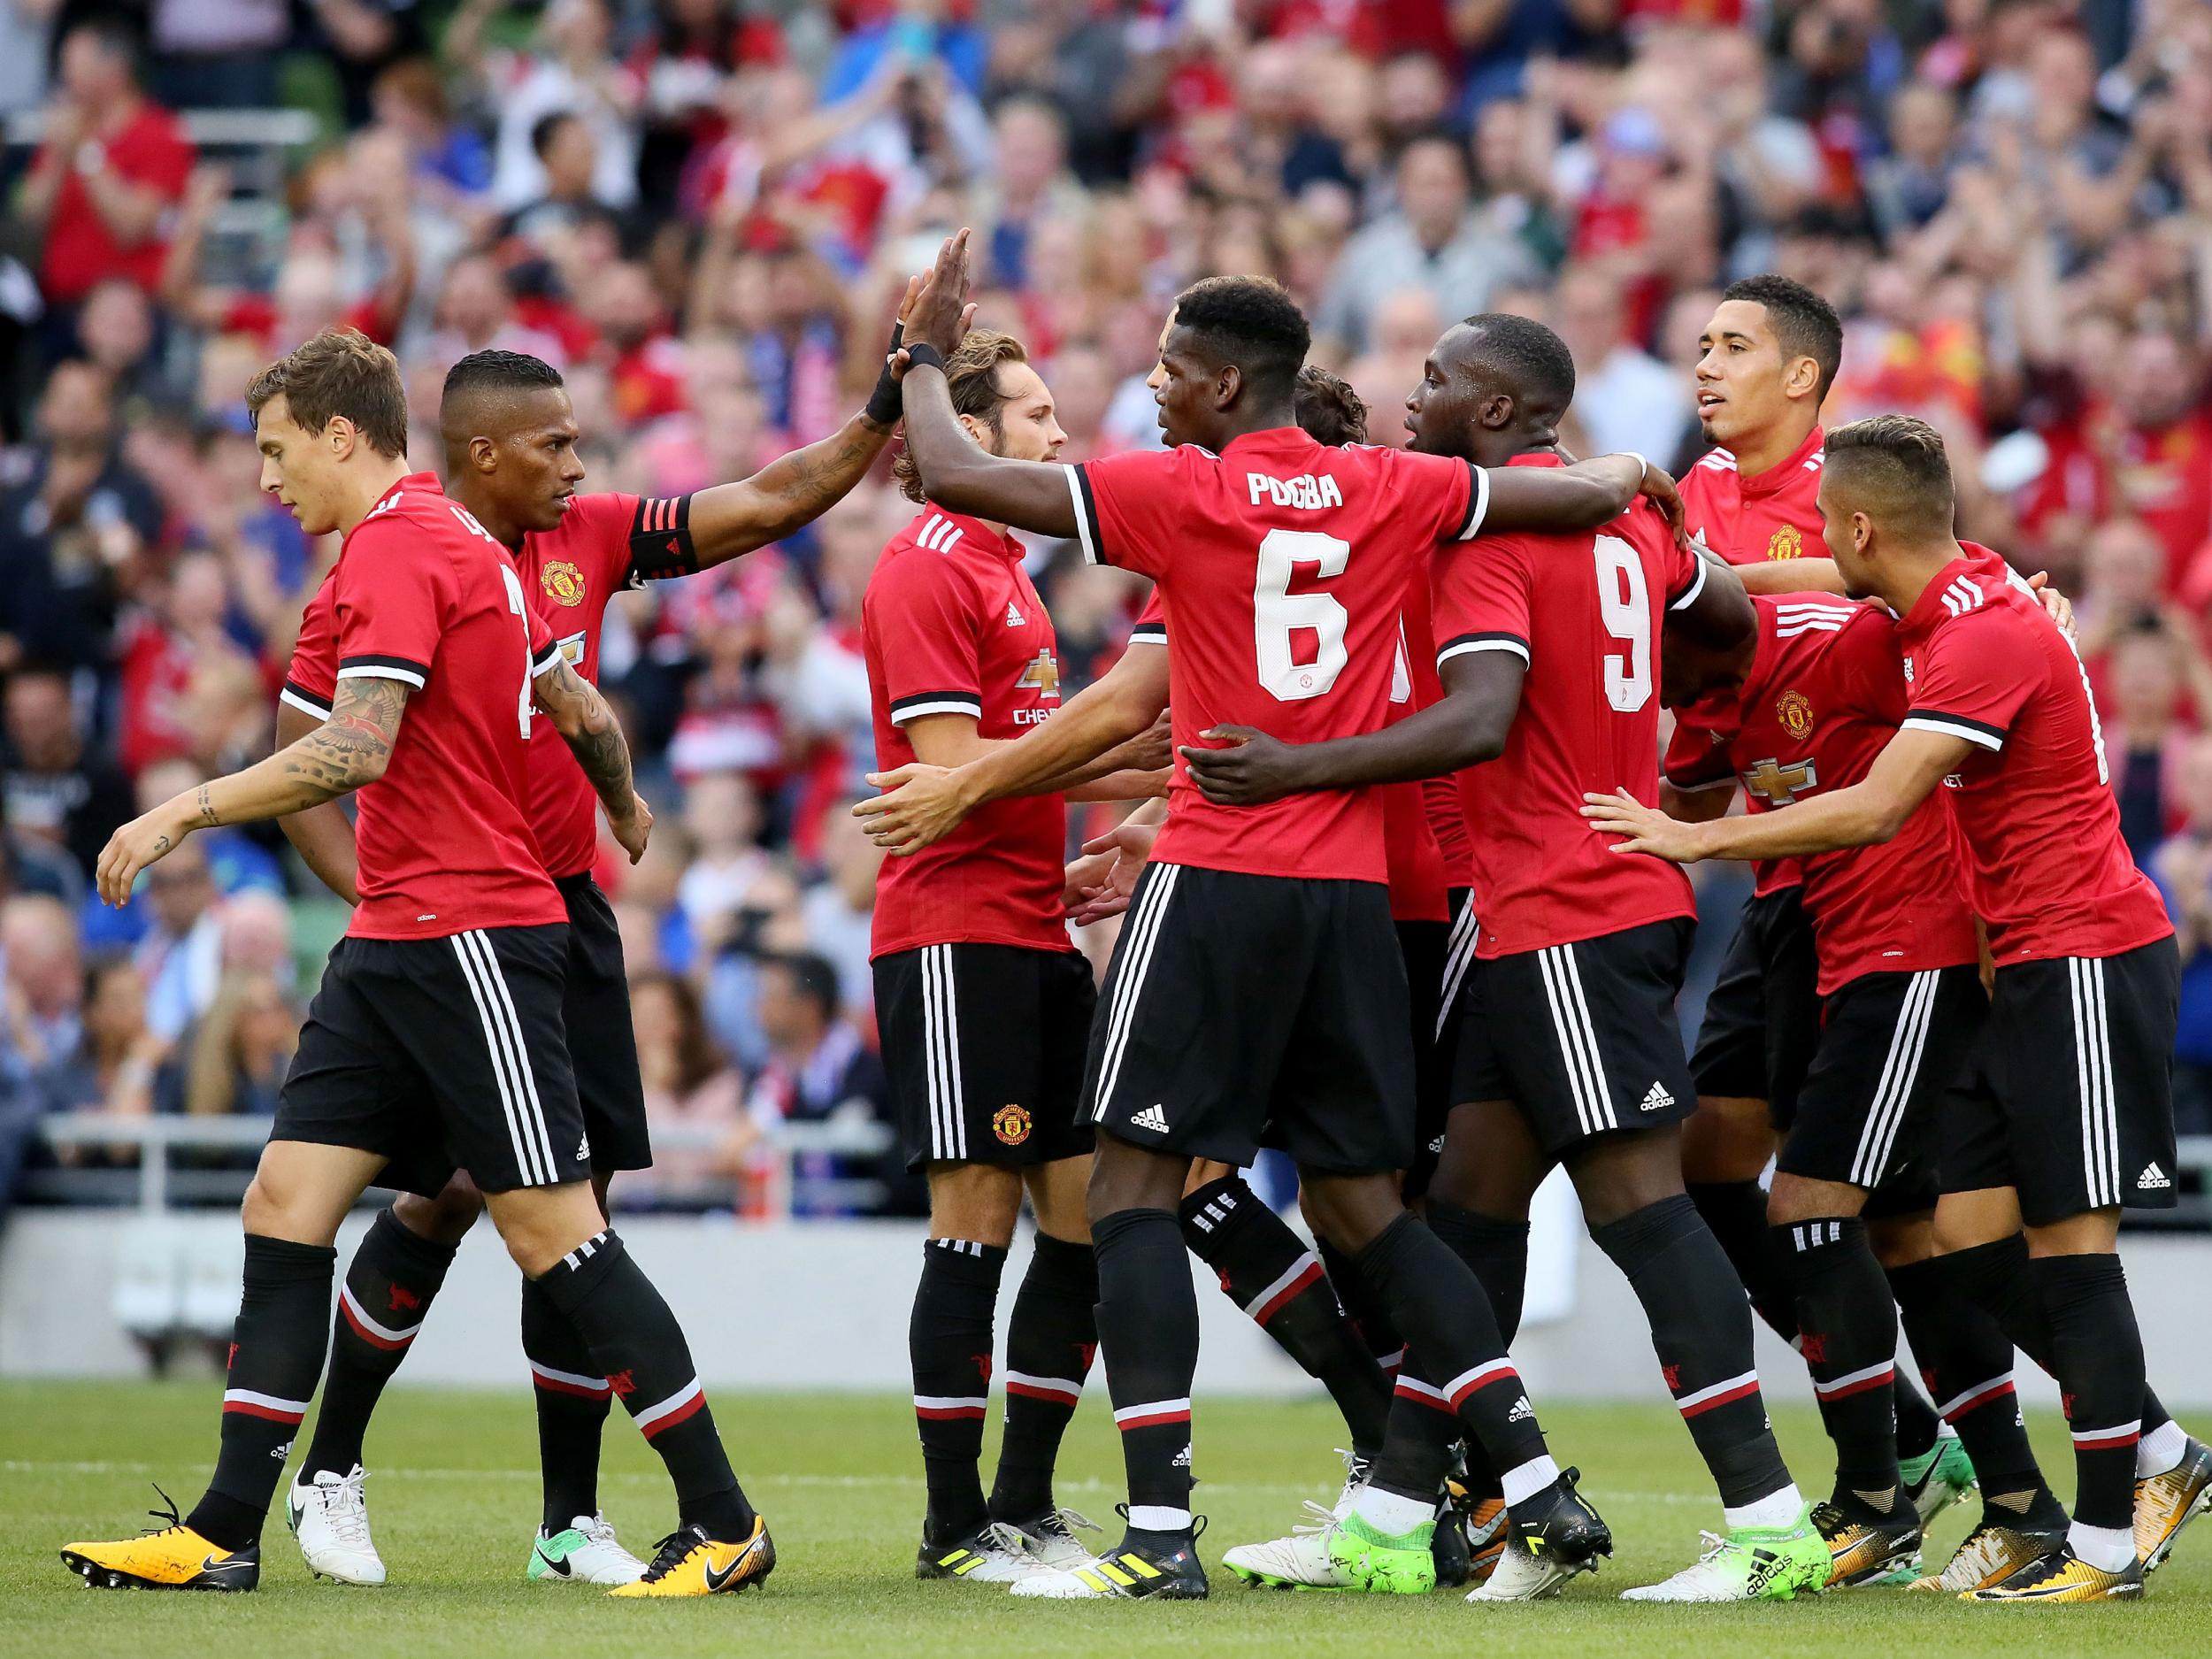 Manchester United ended their pre-season with victory over Serie A side Sampdoria